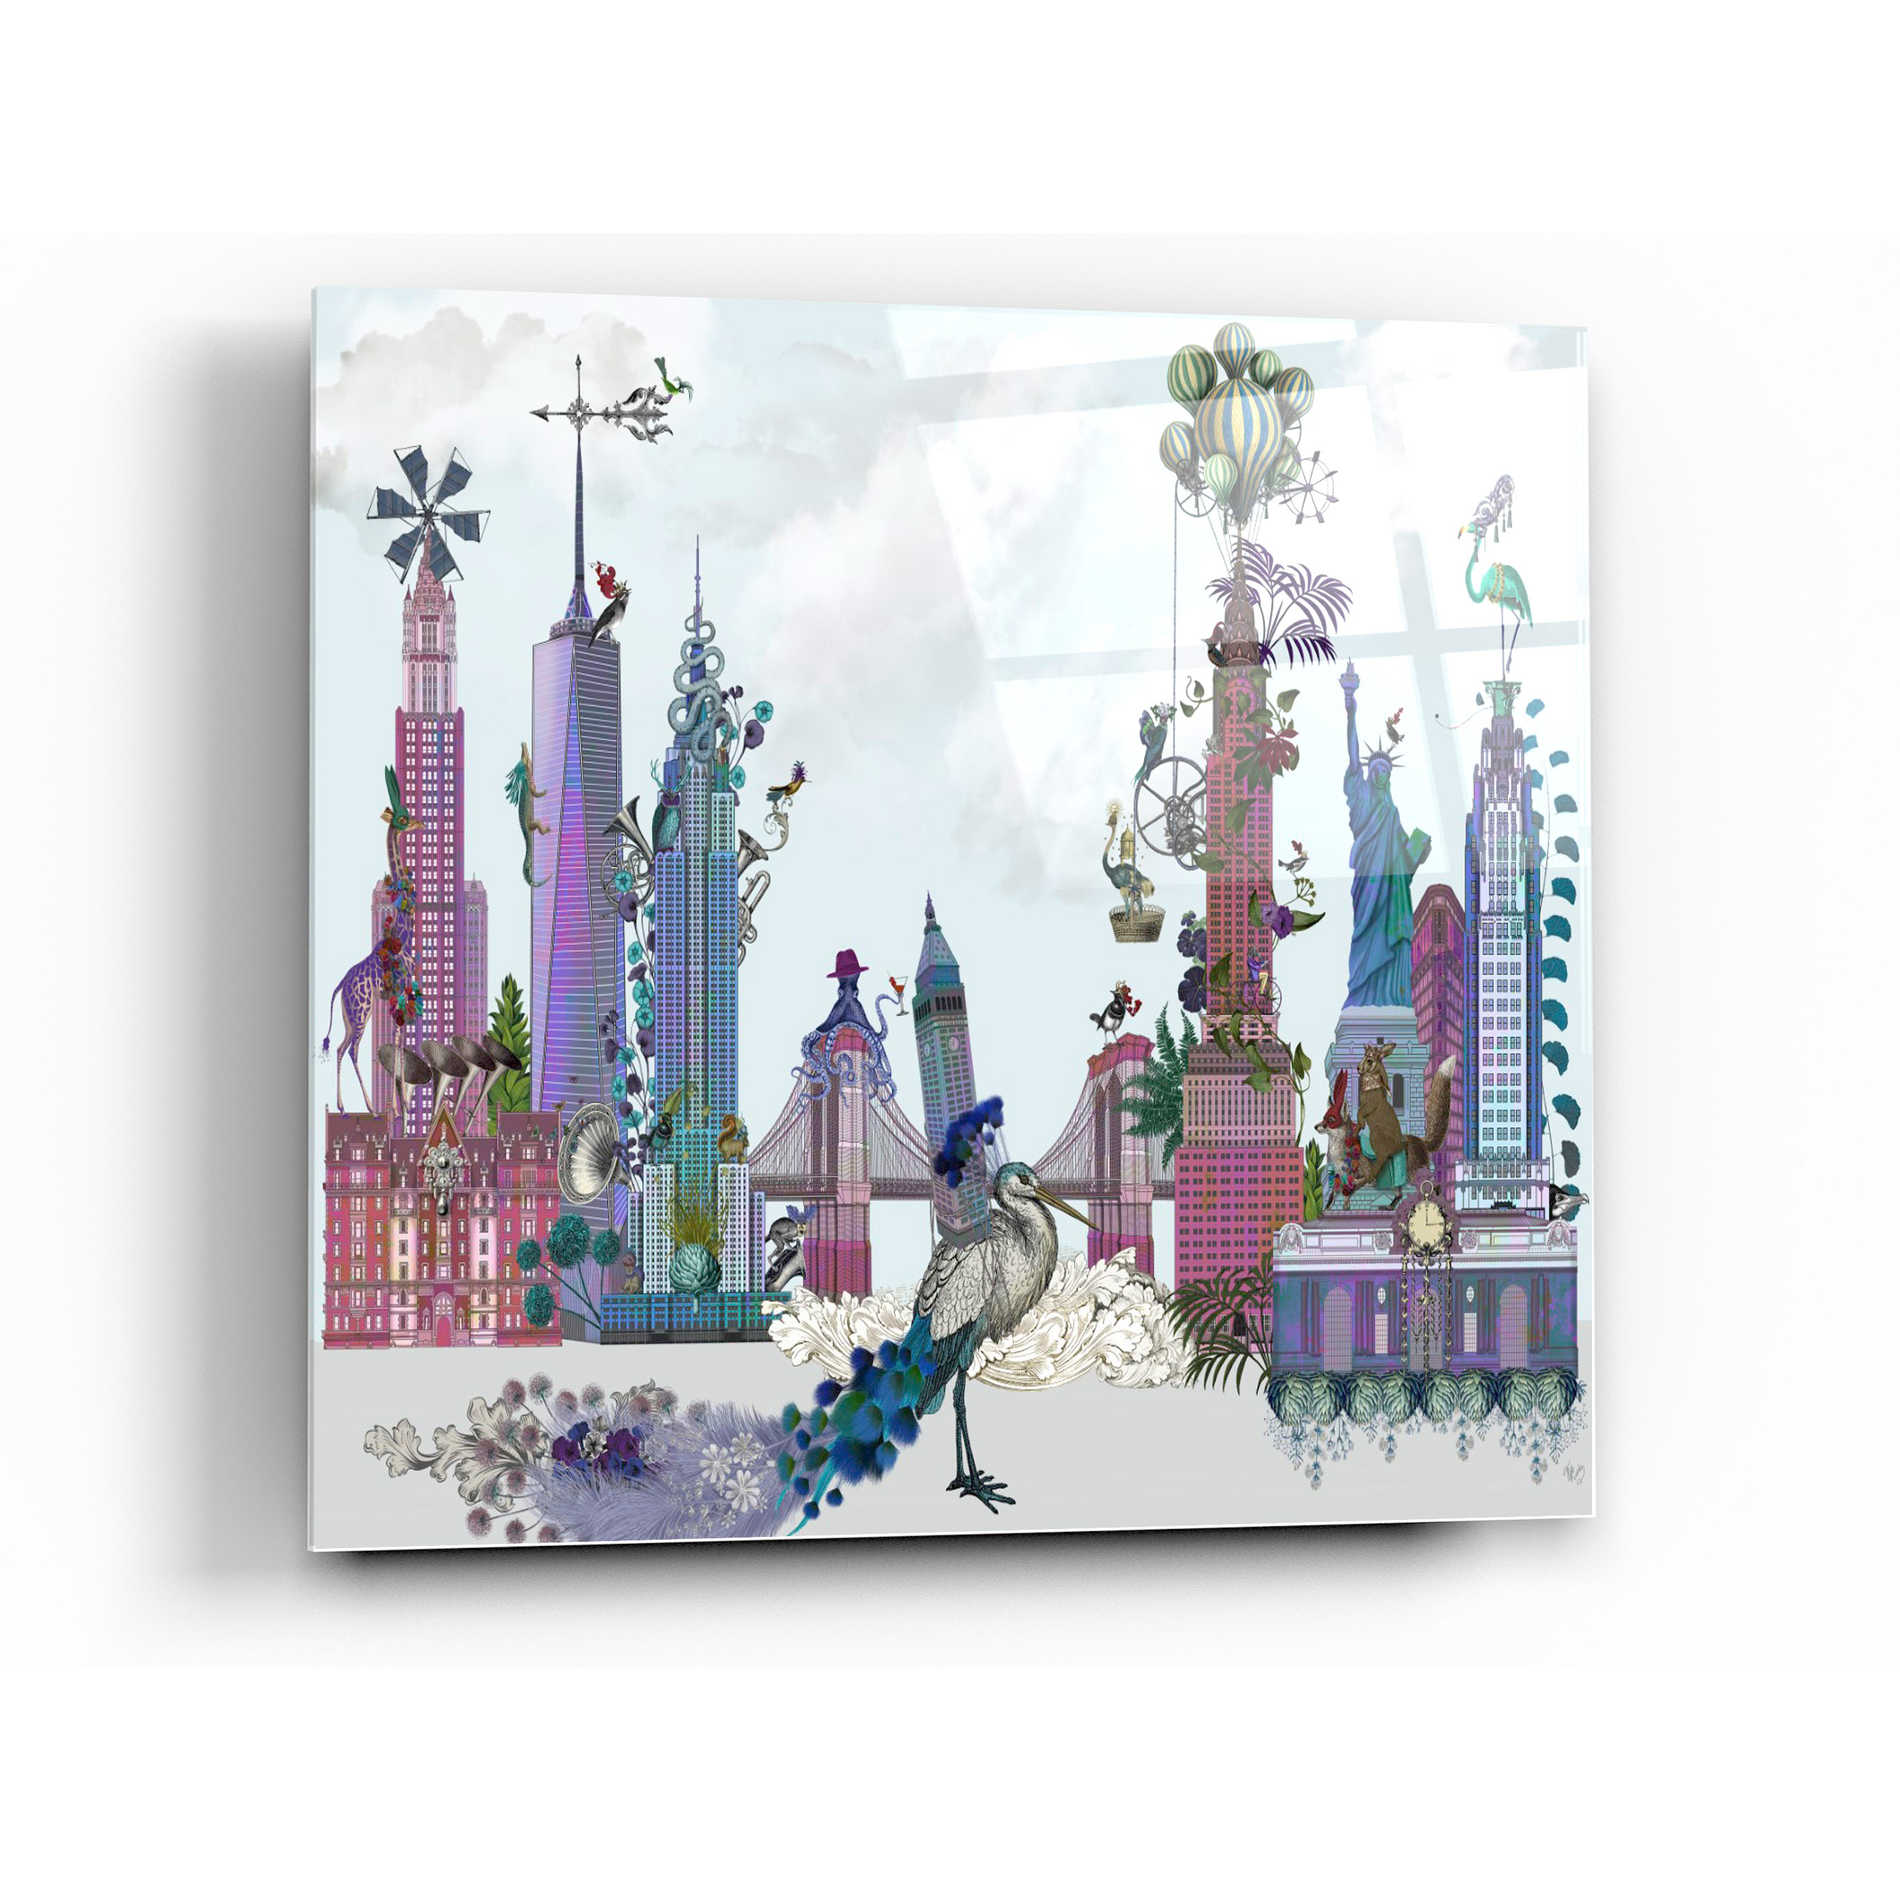 Epic Art 'New York City, Menagerie' by Fab Funky Acrylic Glass Wall Art,12x12